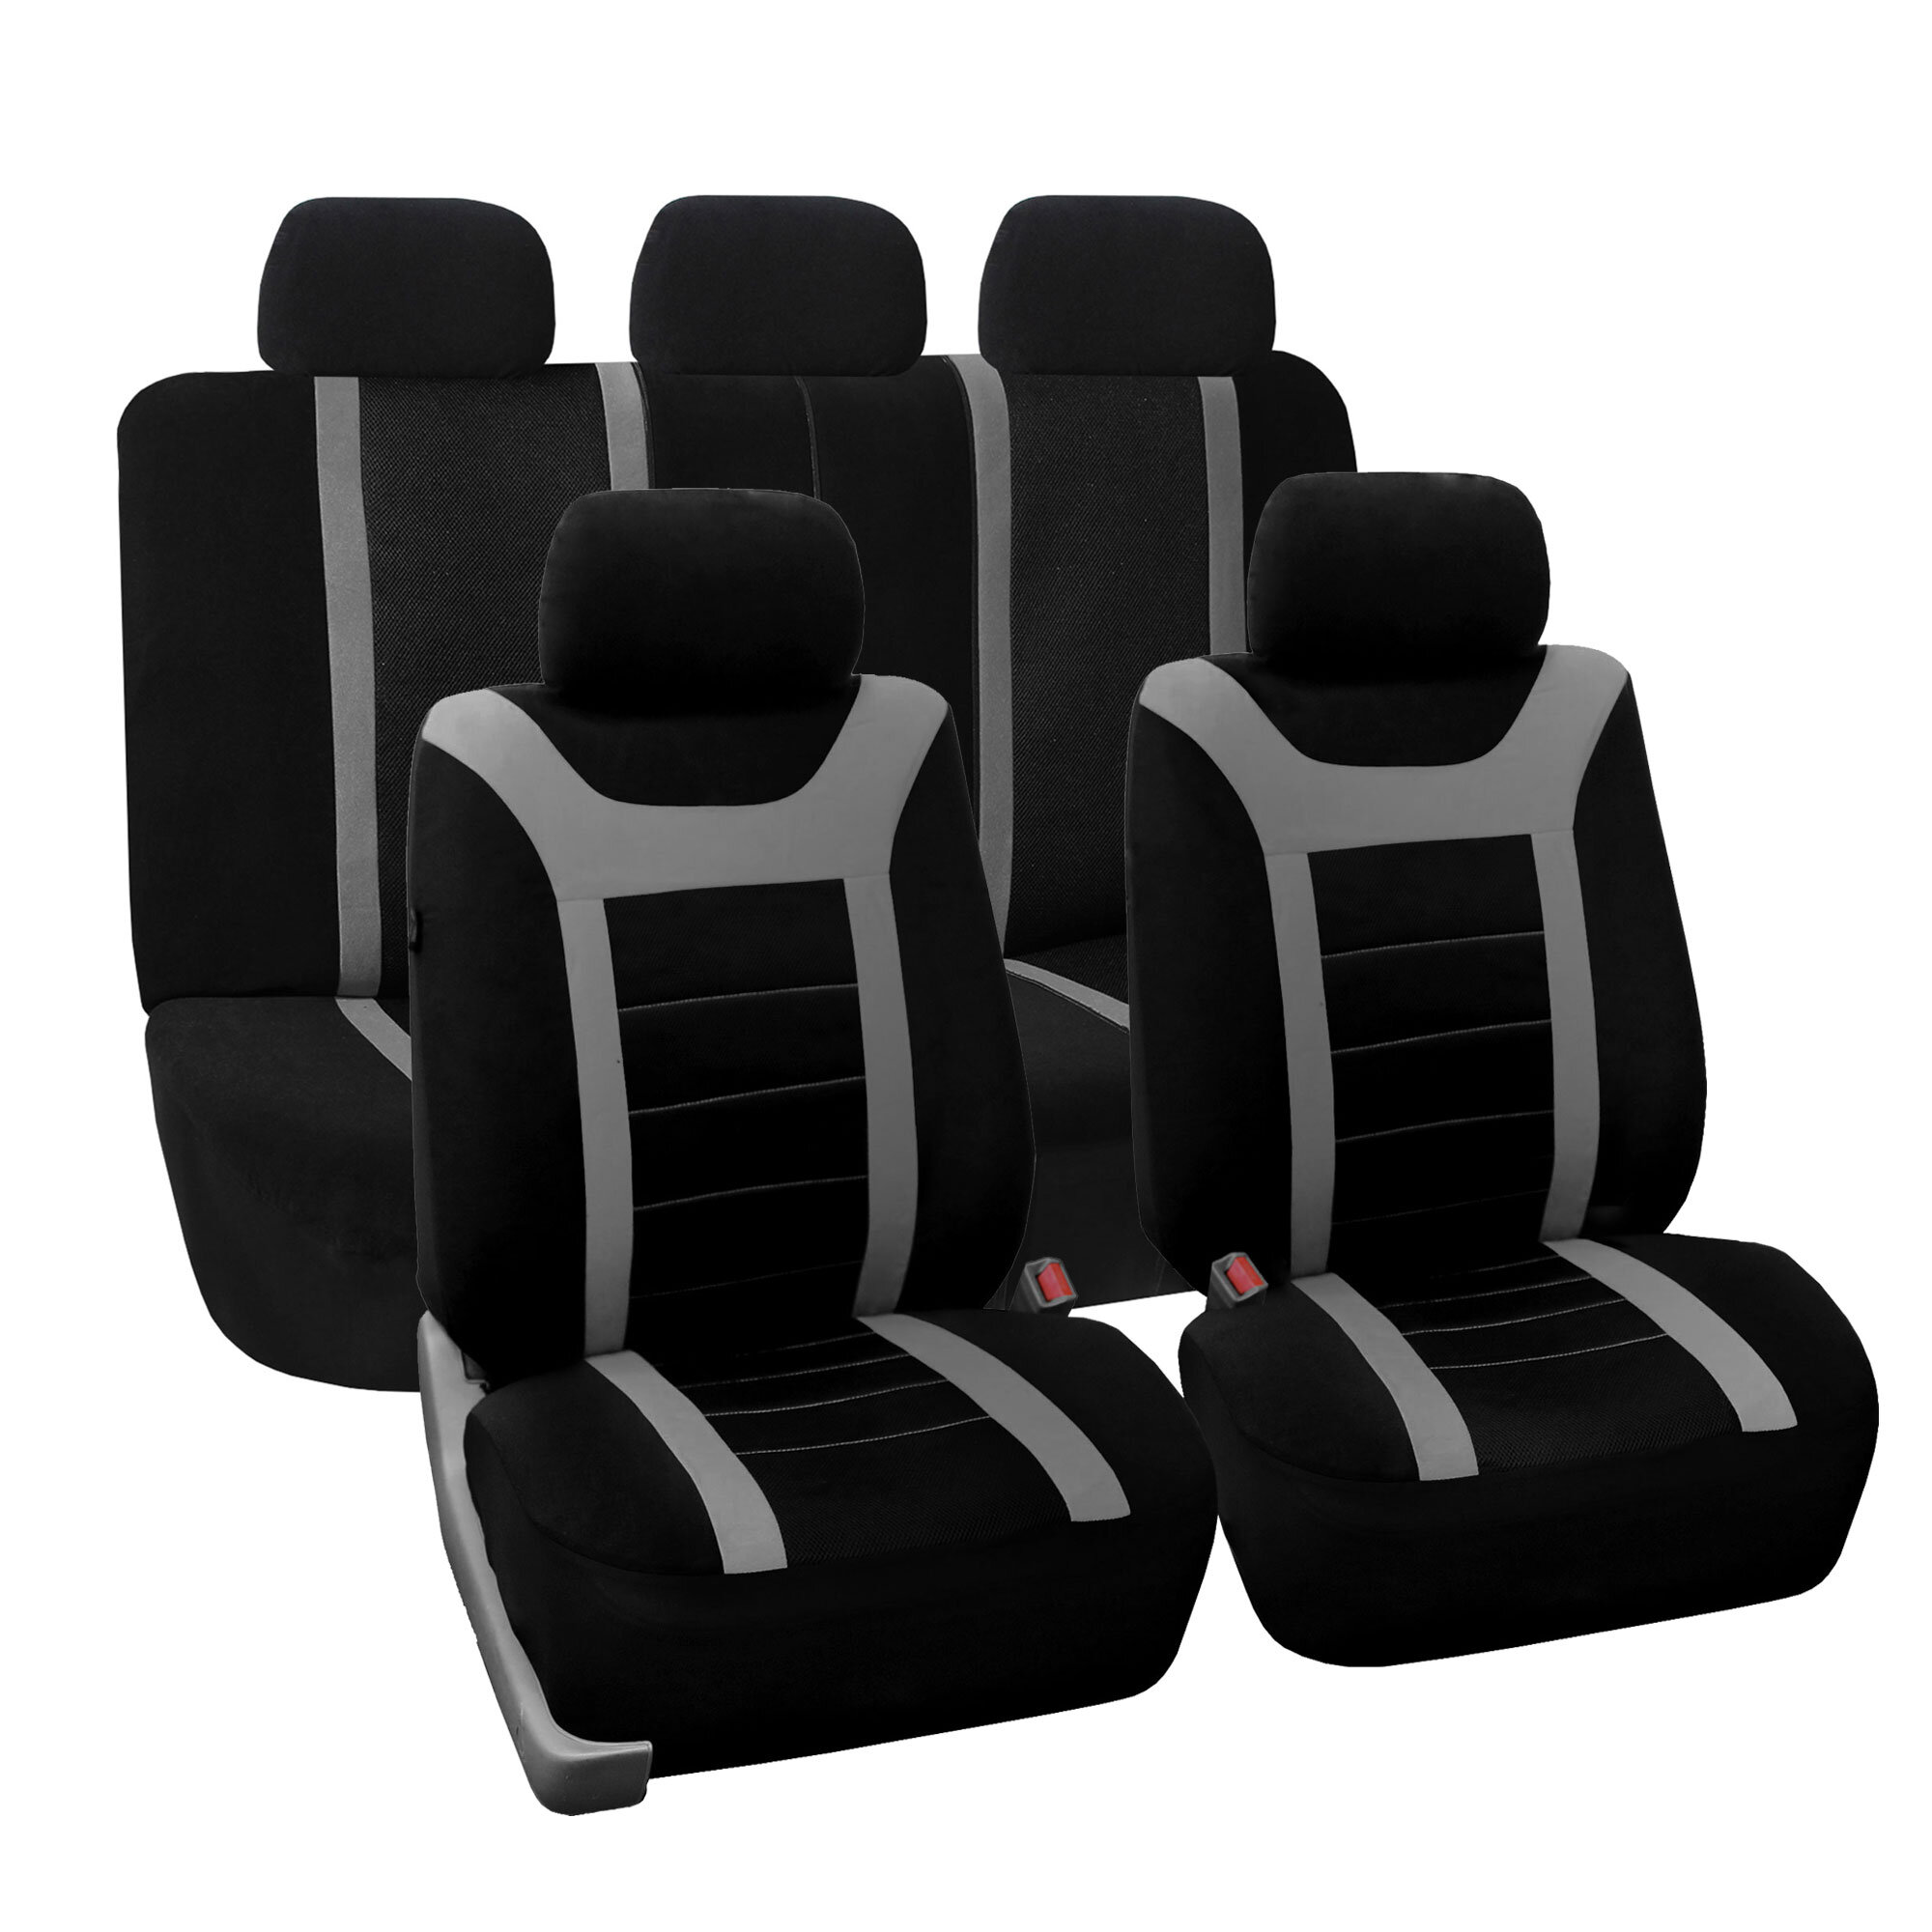 FH Group Sports Seat Covers Full Set & Reviews